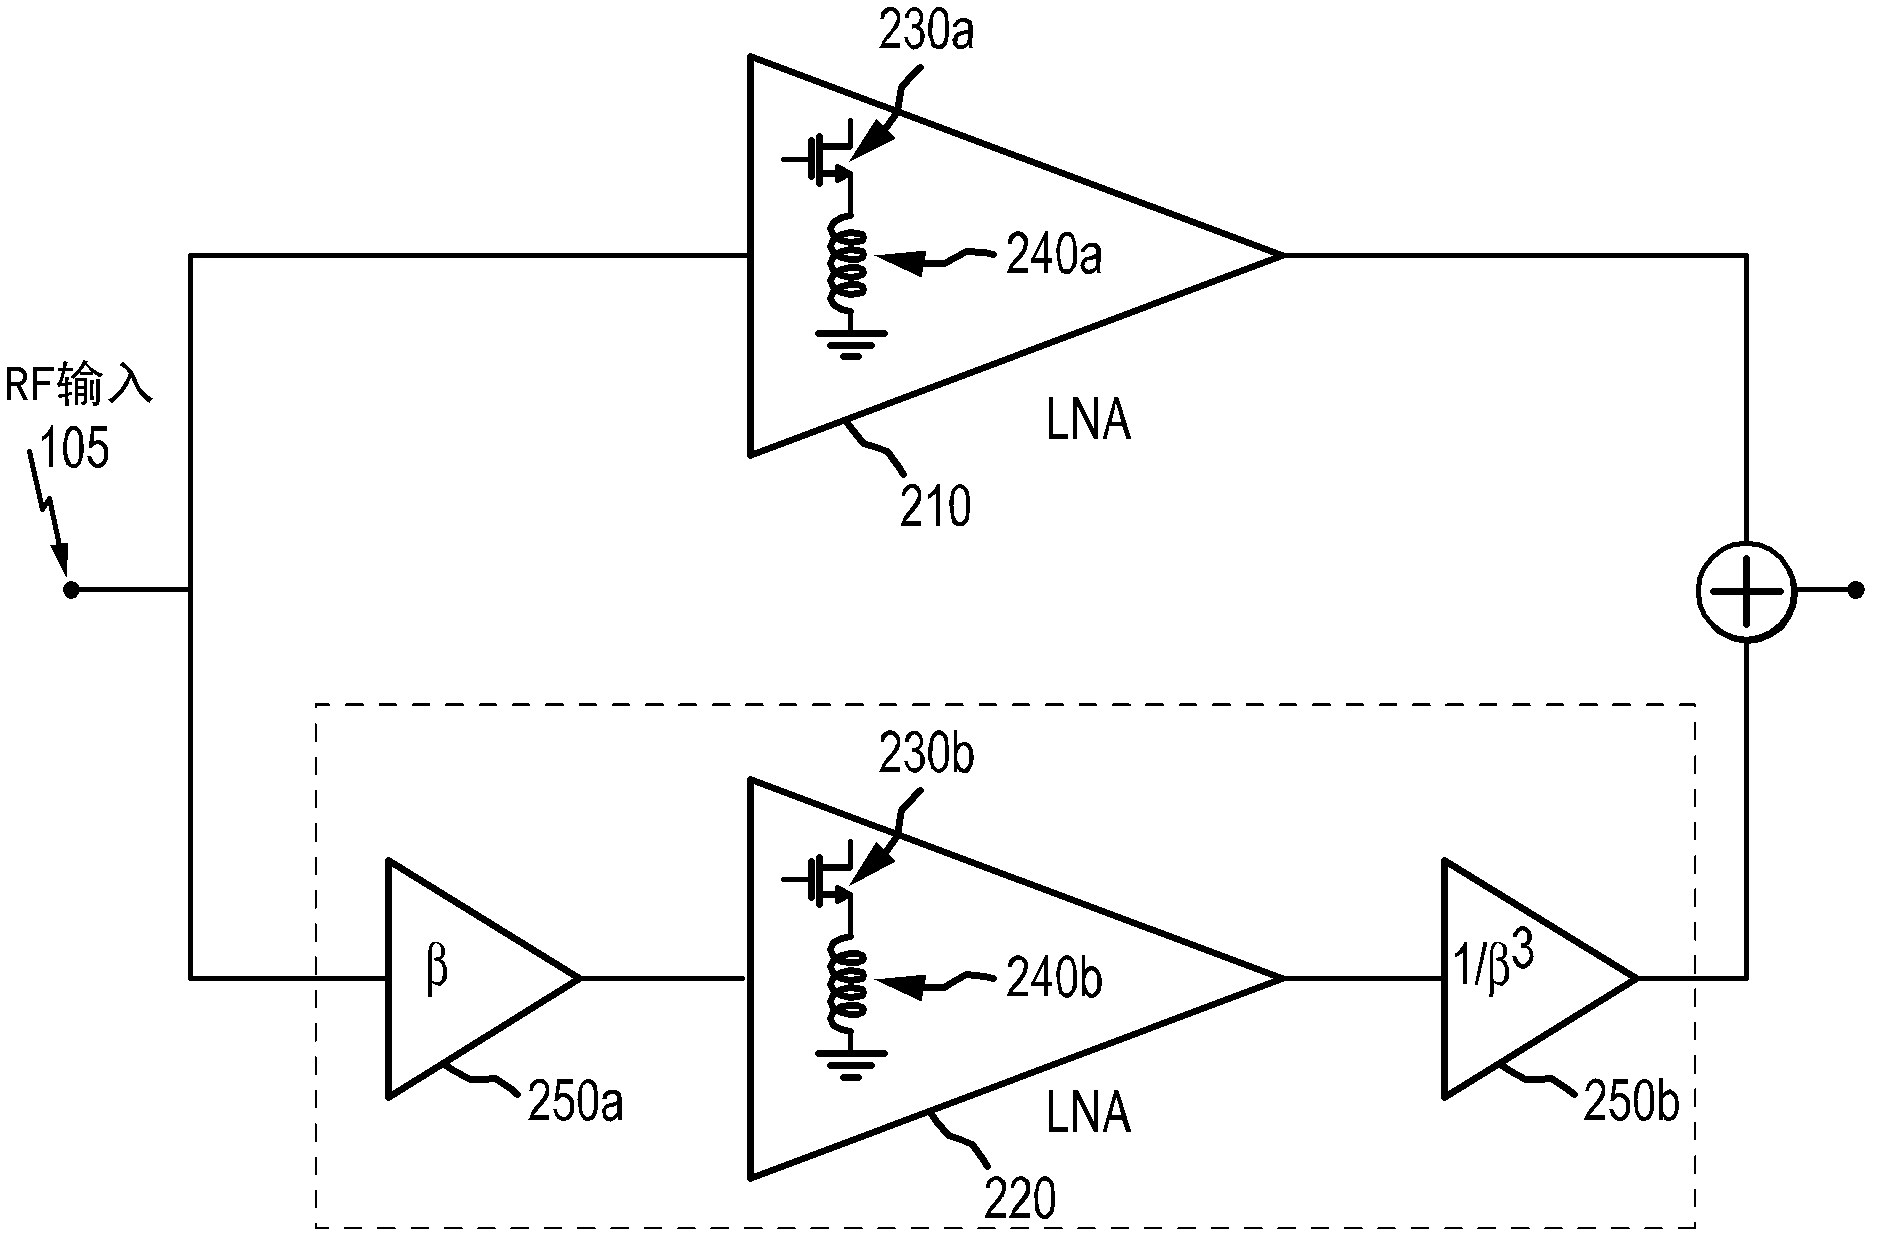 Ultra low noise high linearity LNA for multi-mode transceiver